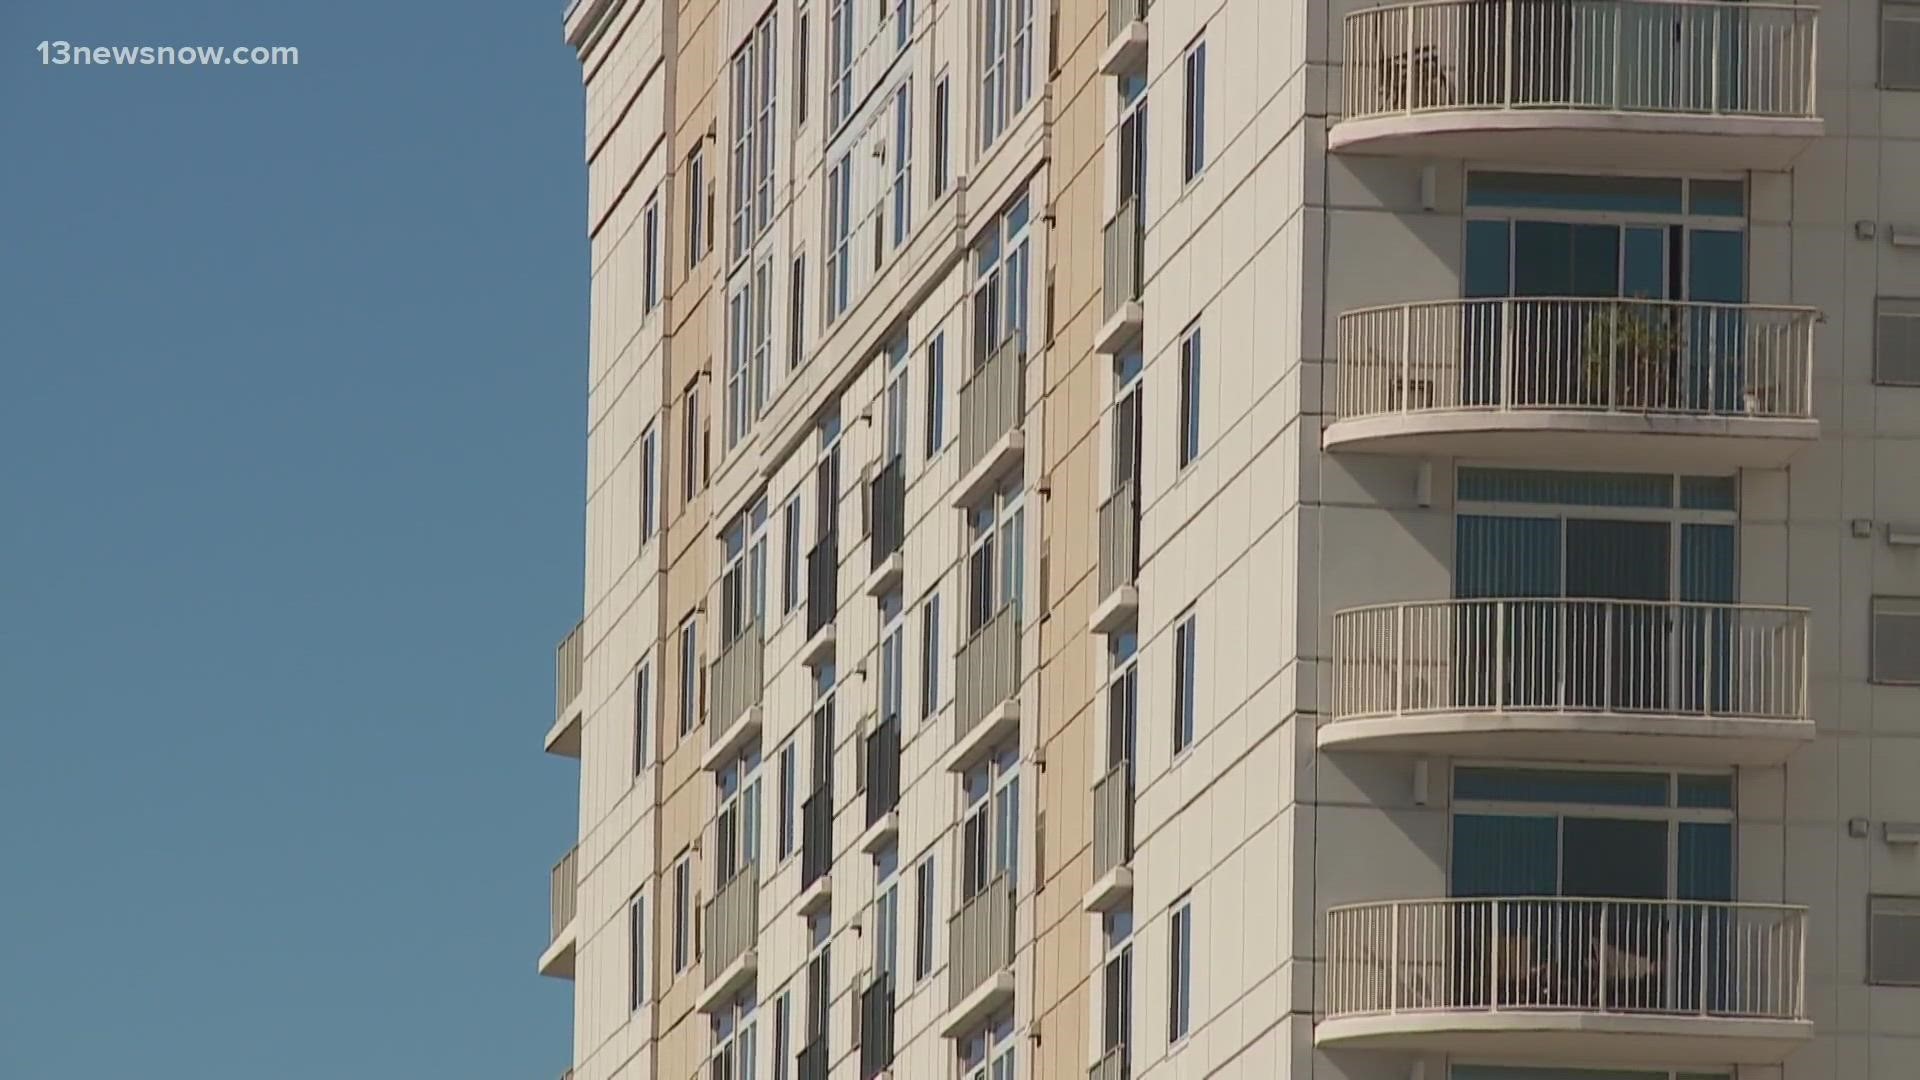 Right now, the city is not accepting applications from residents struggling to pay rent.